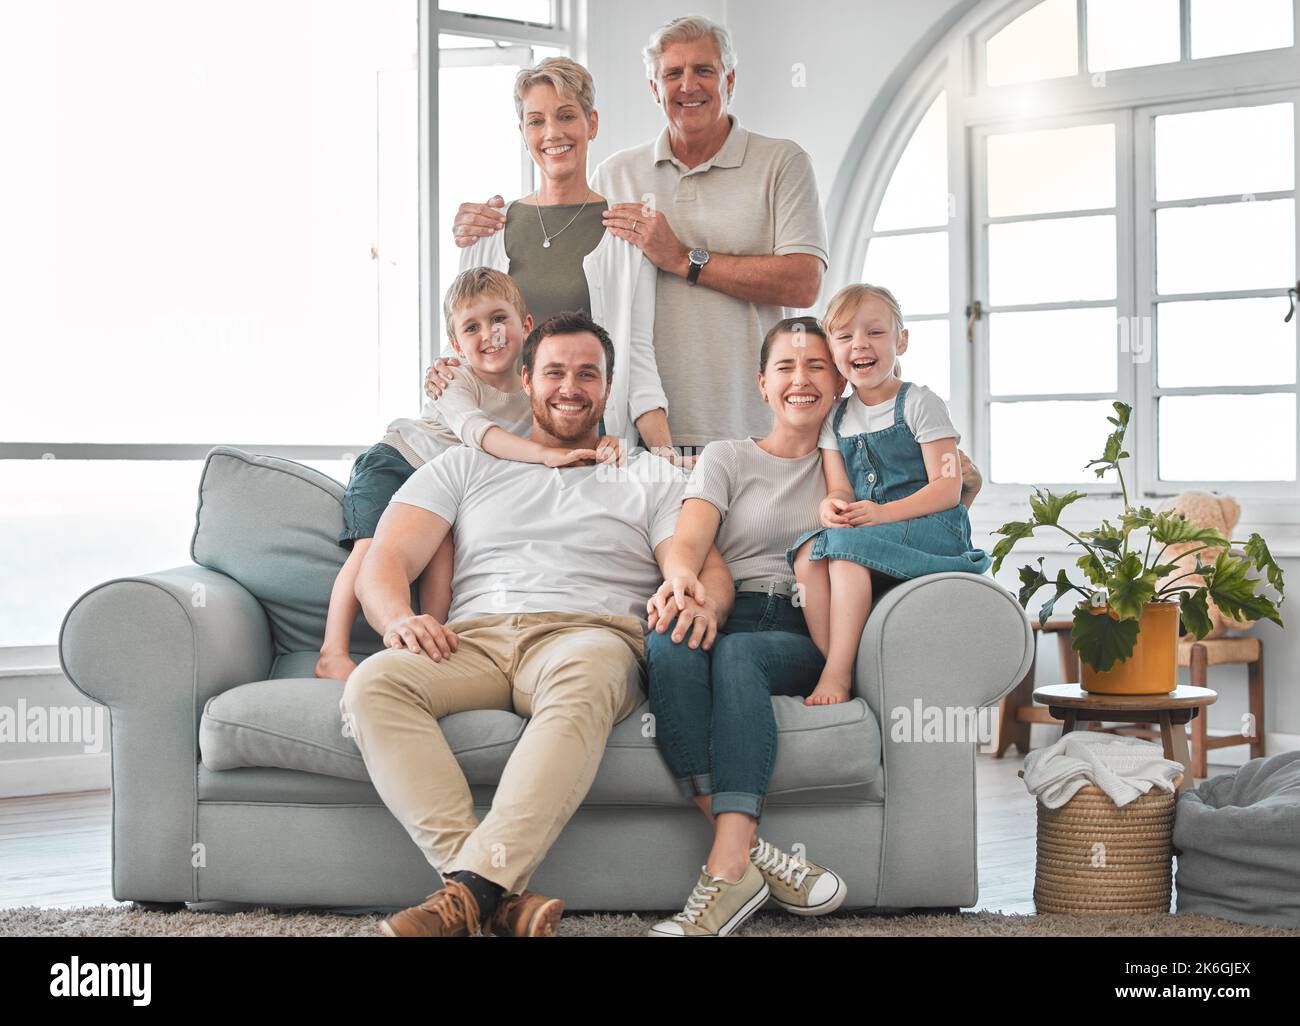 All happy families are alike. a happy family relaxing on the sofa at home. Stock Photo